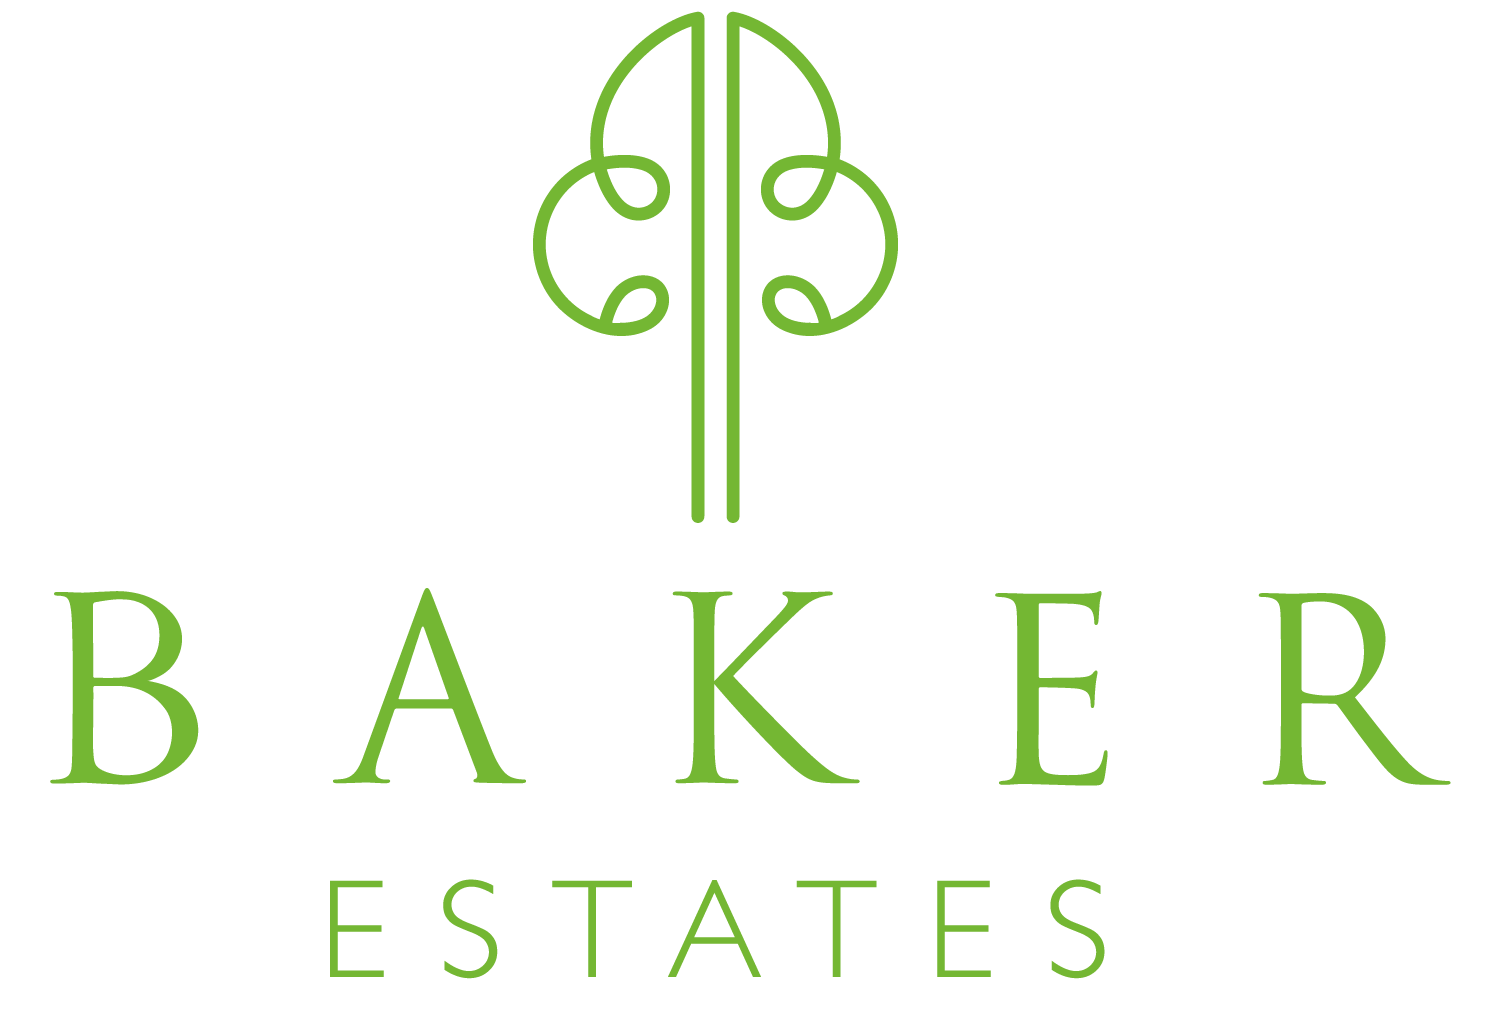 We would like to welcome Baker Estates 